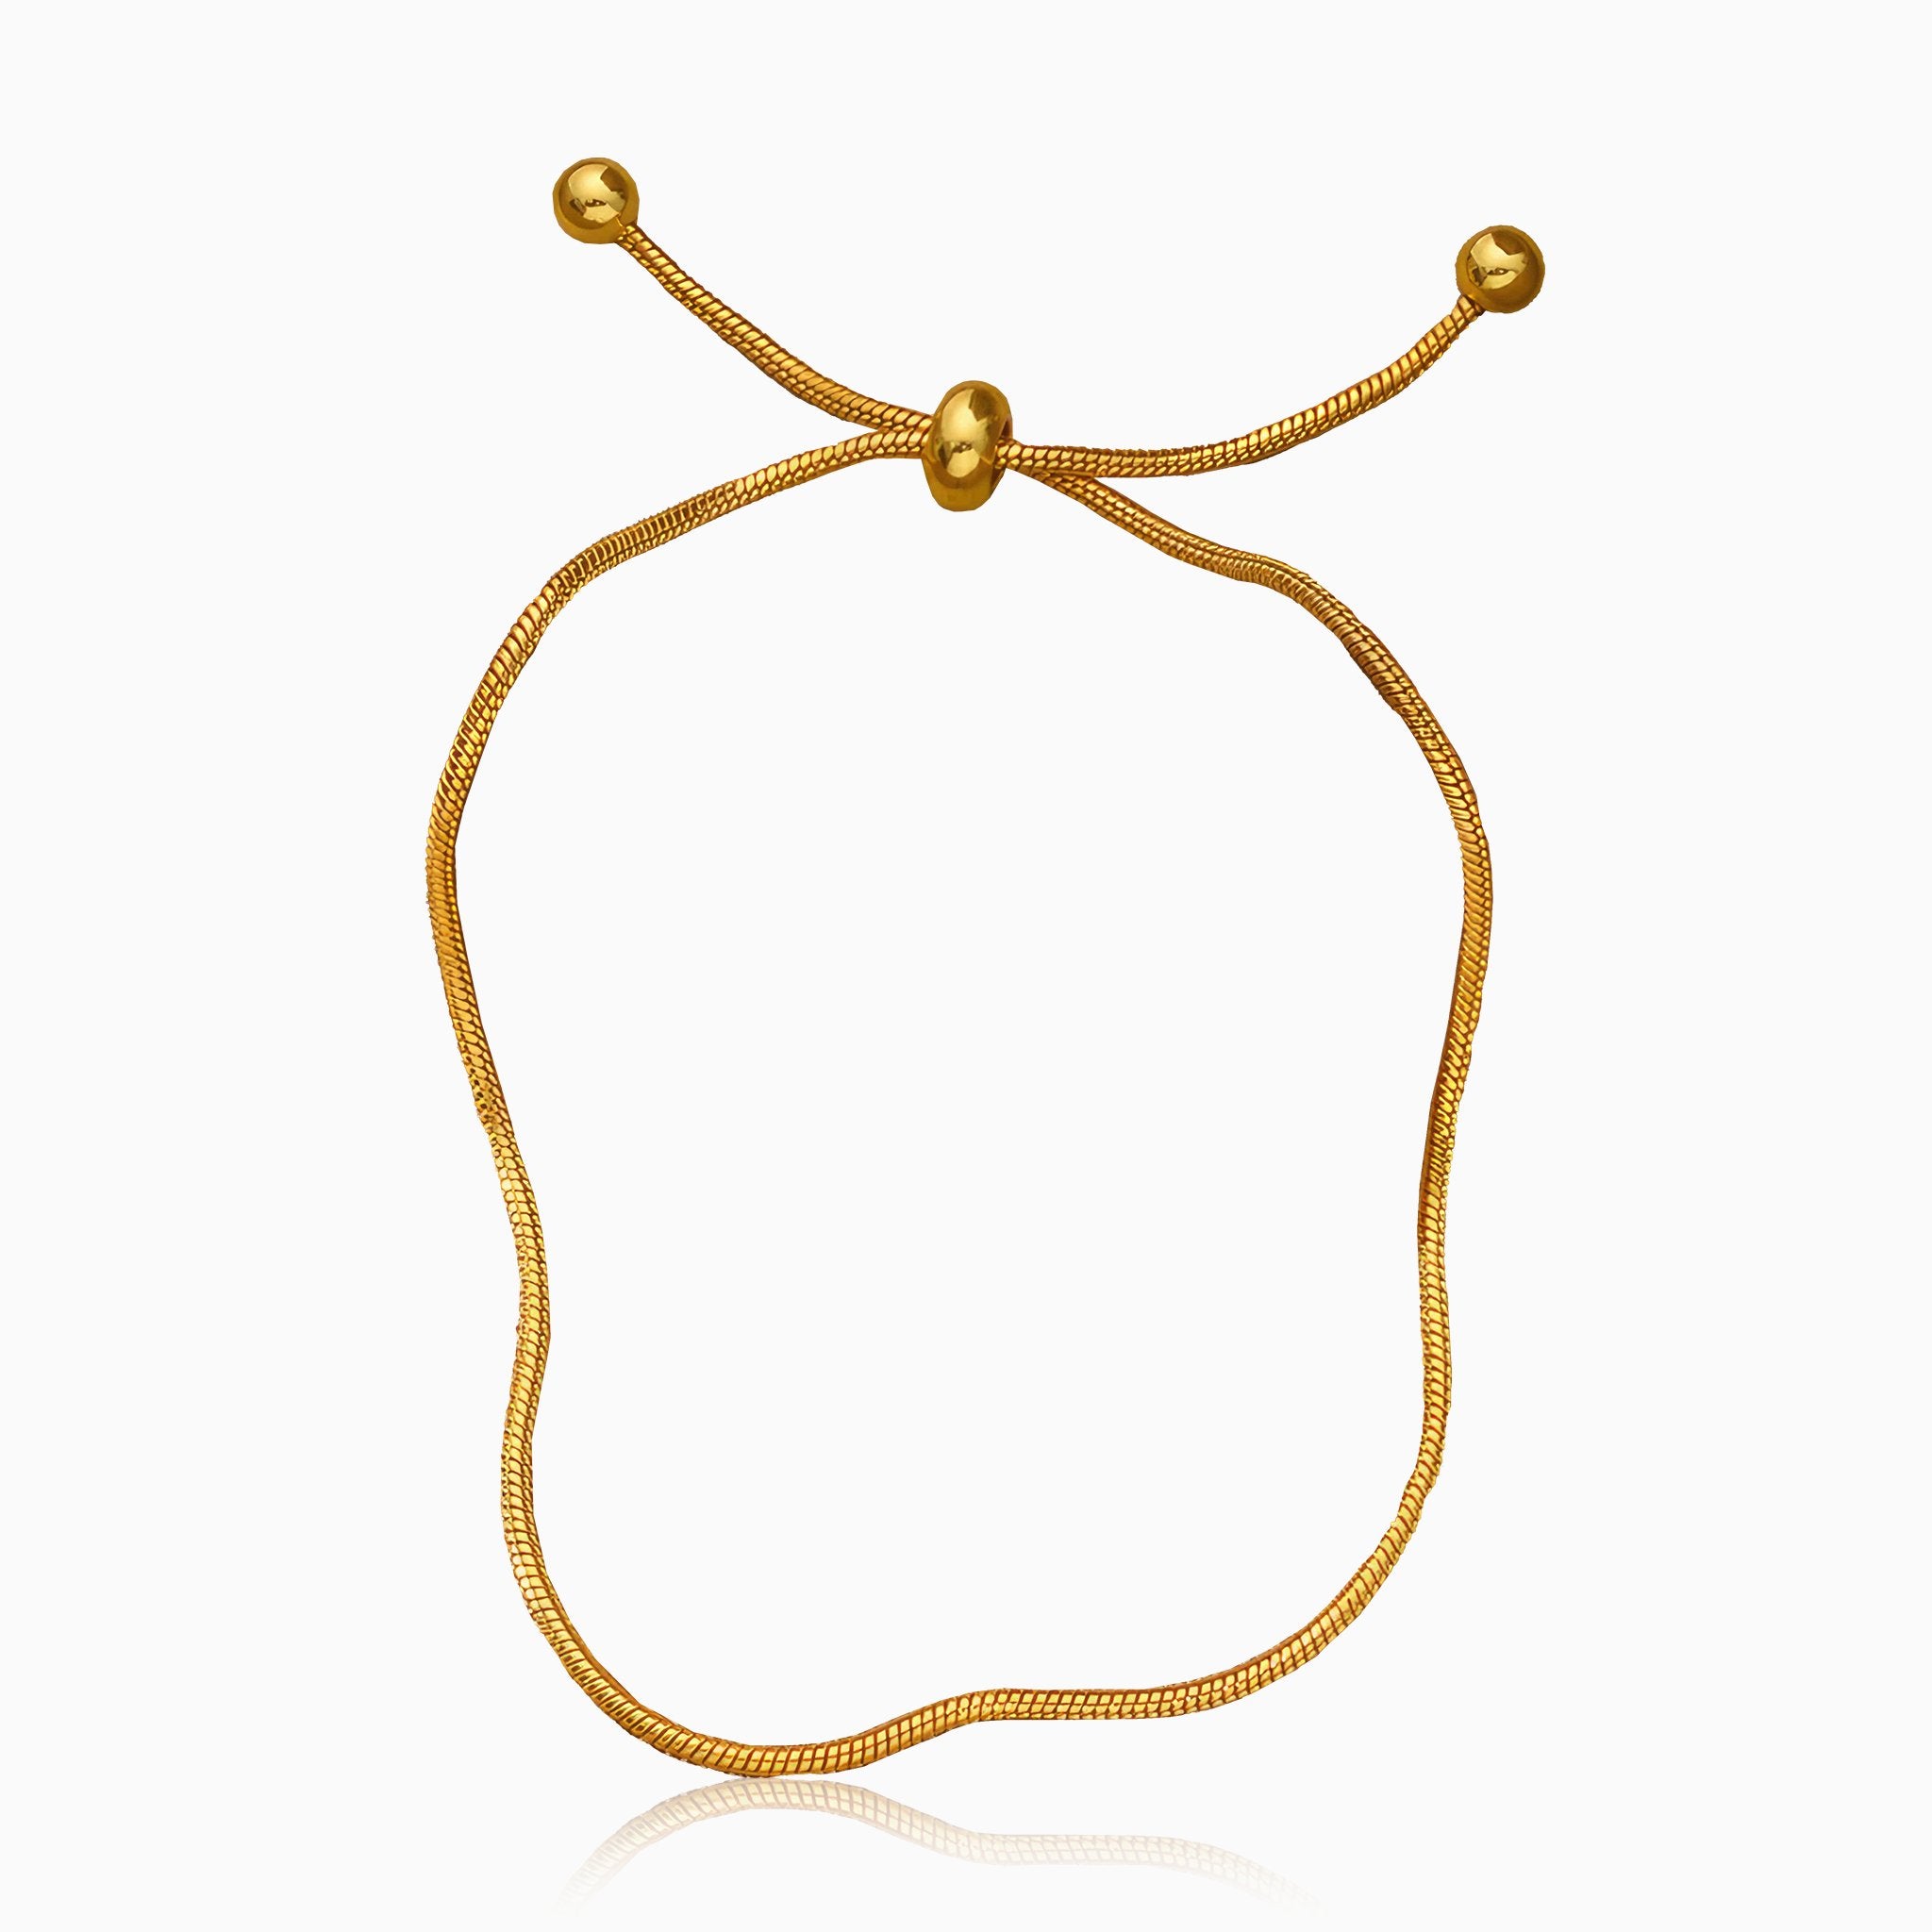 Light Luxury Exquisite All-Match Bracelet - Nobbier - Necklace - 18K Gold And Titanium PVD Coated Jewelry